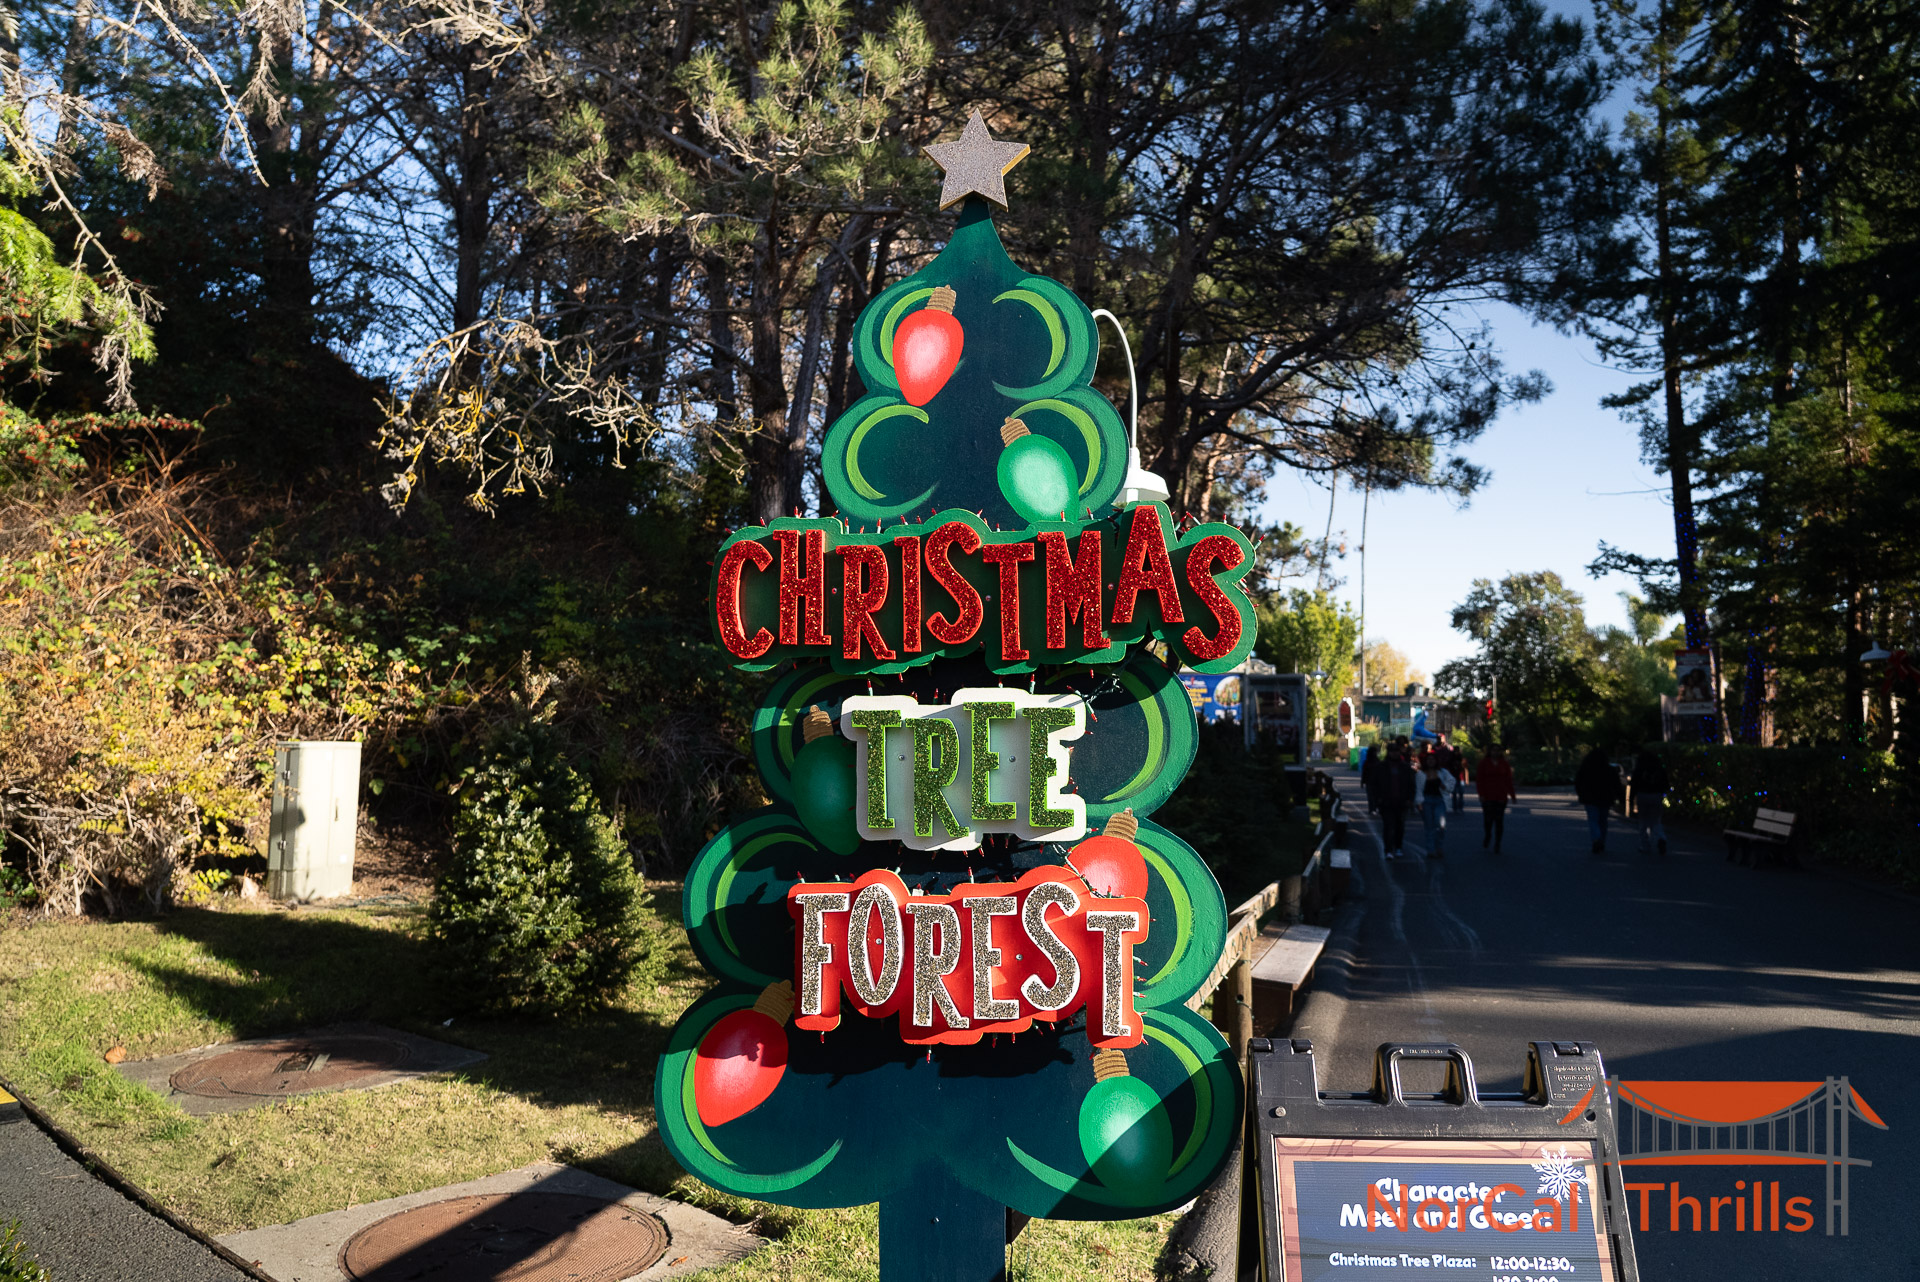 Holiday in the Park | Christmas Tree Forest